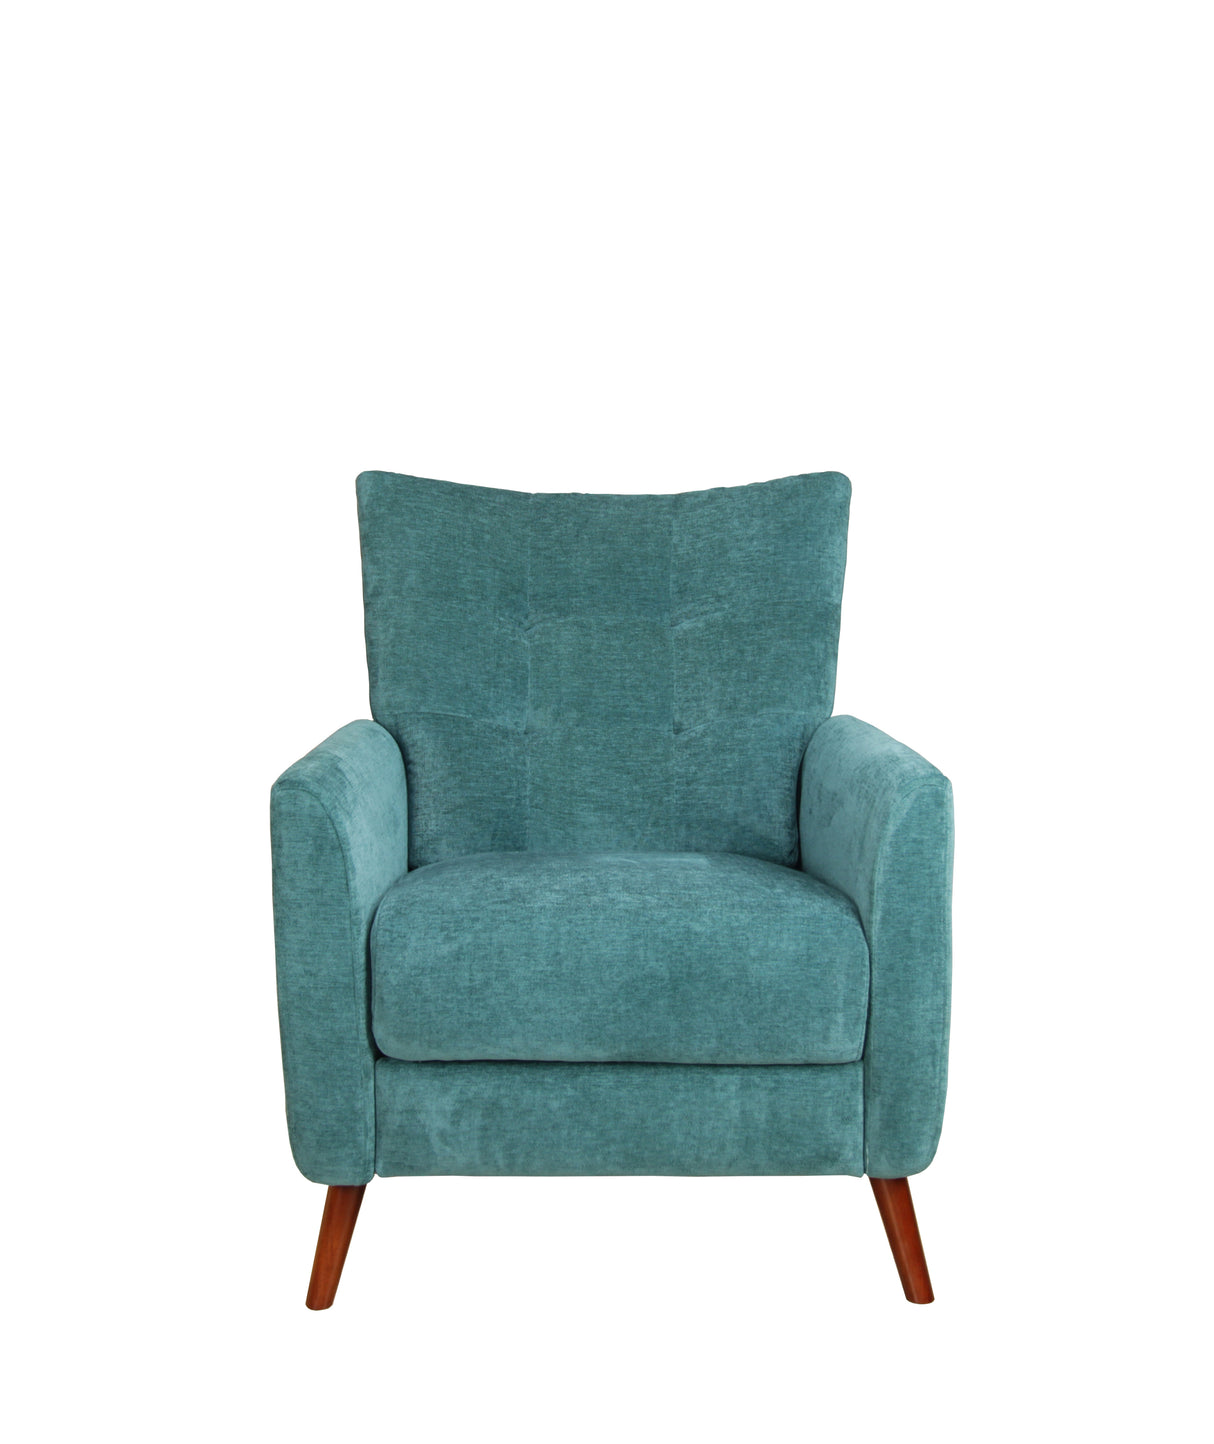 COORS PUSHBACK RECLINER CHAIR - TURQUOISE - Home Elegance USA